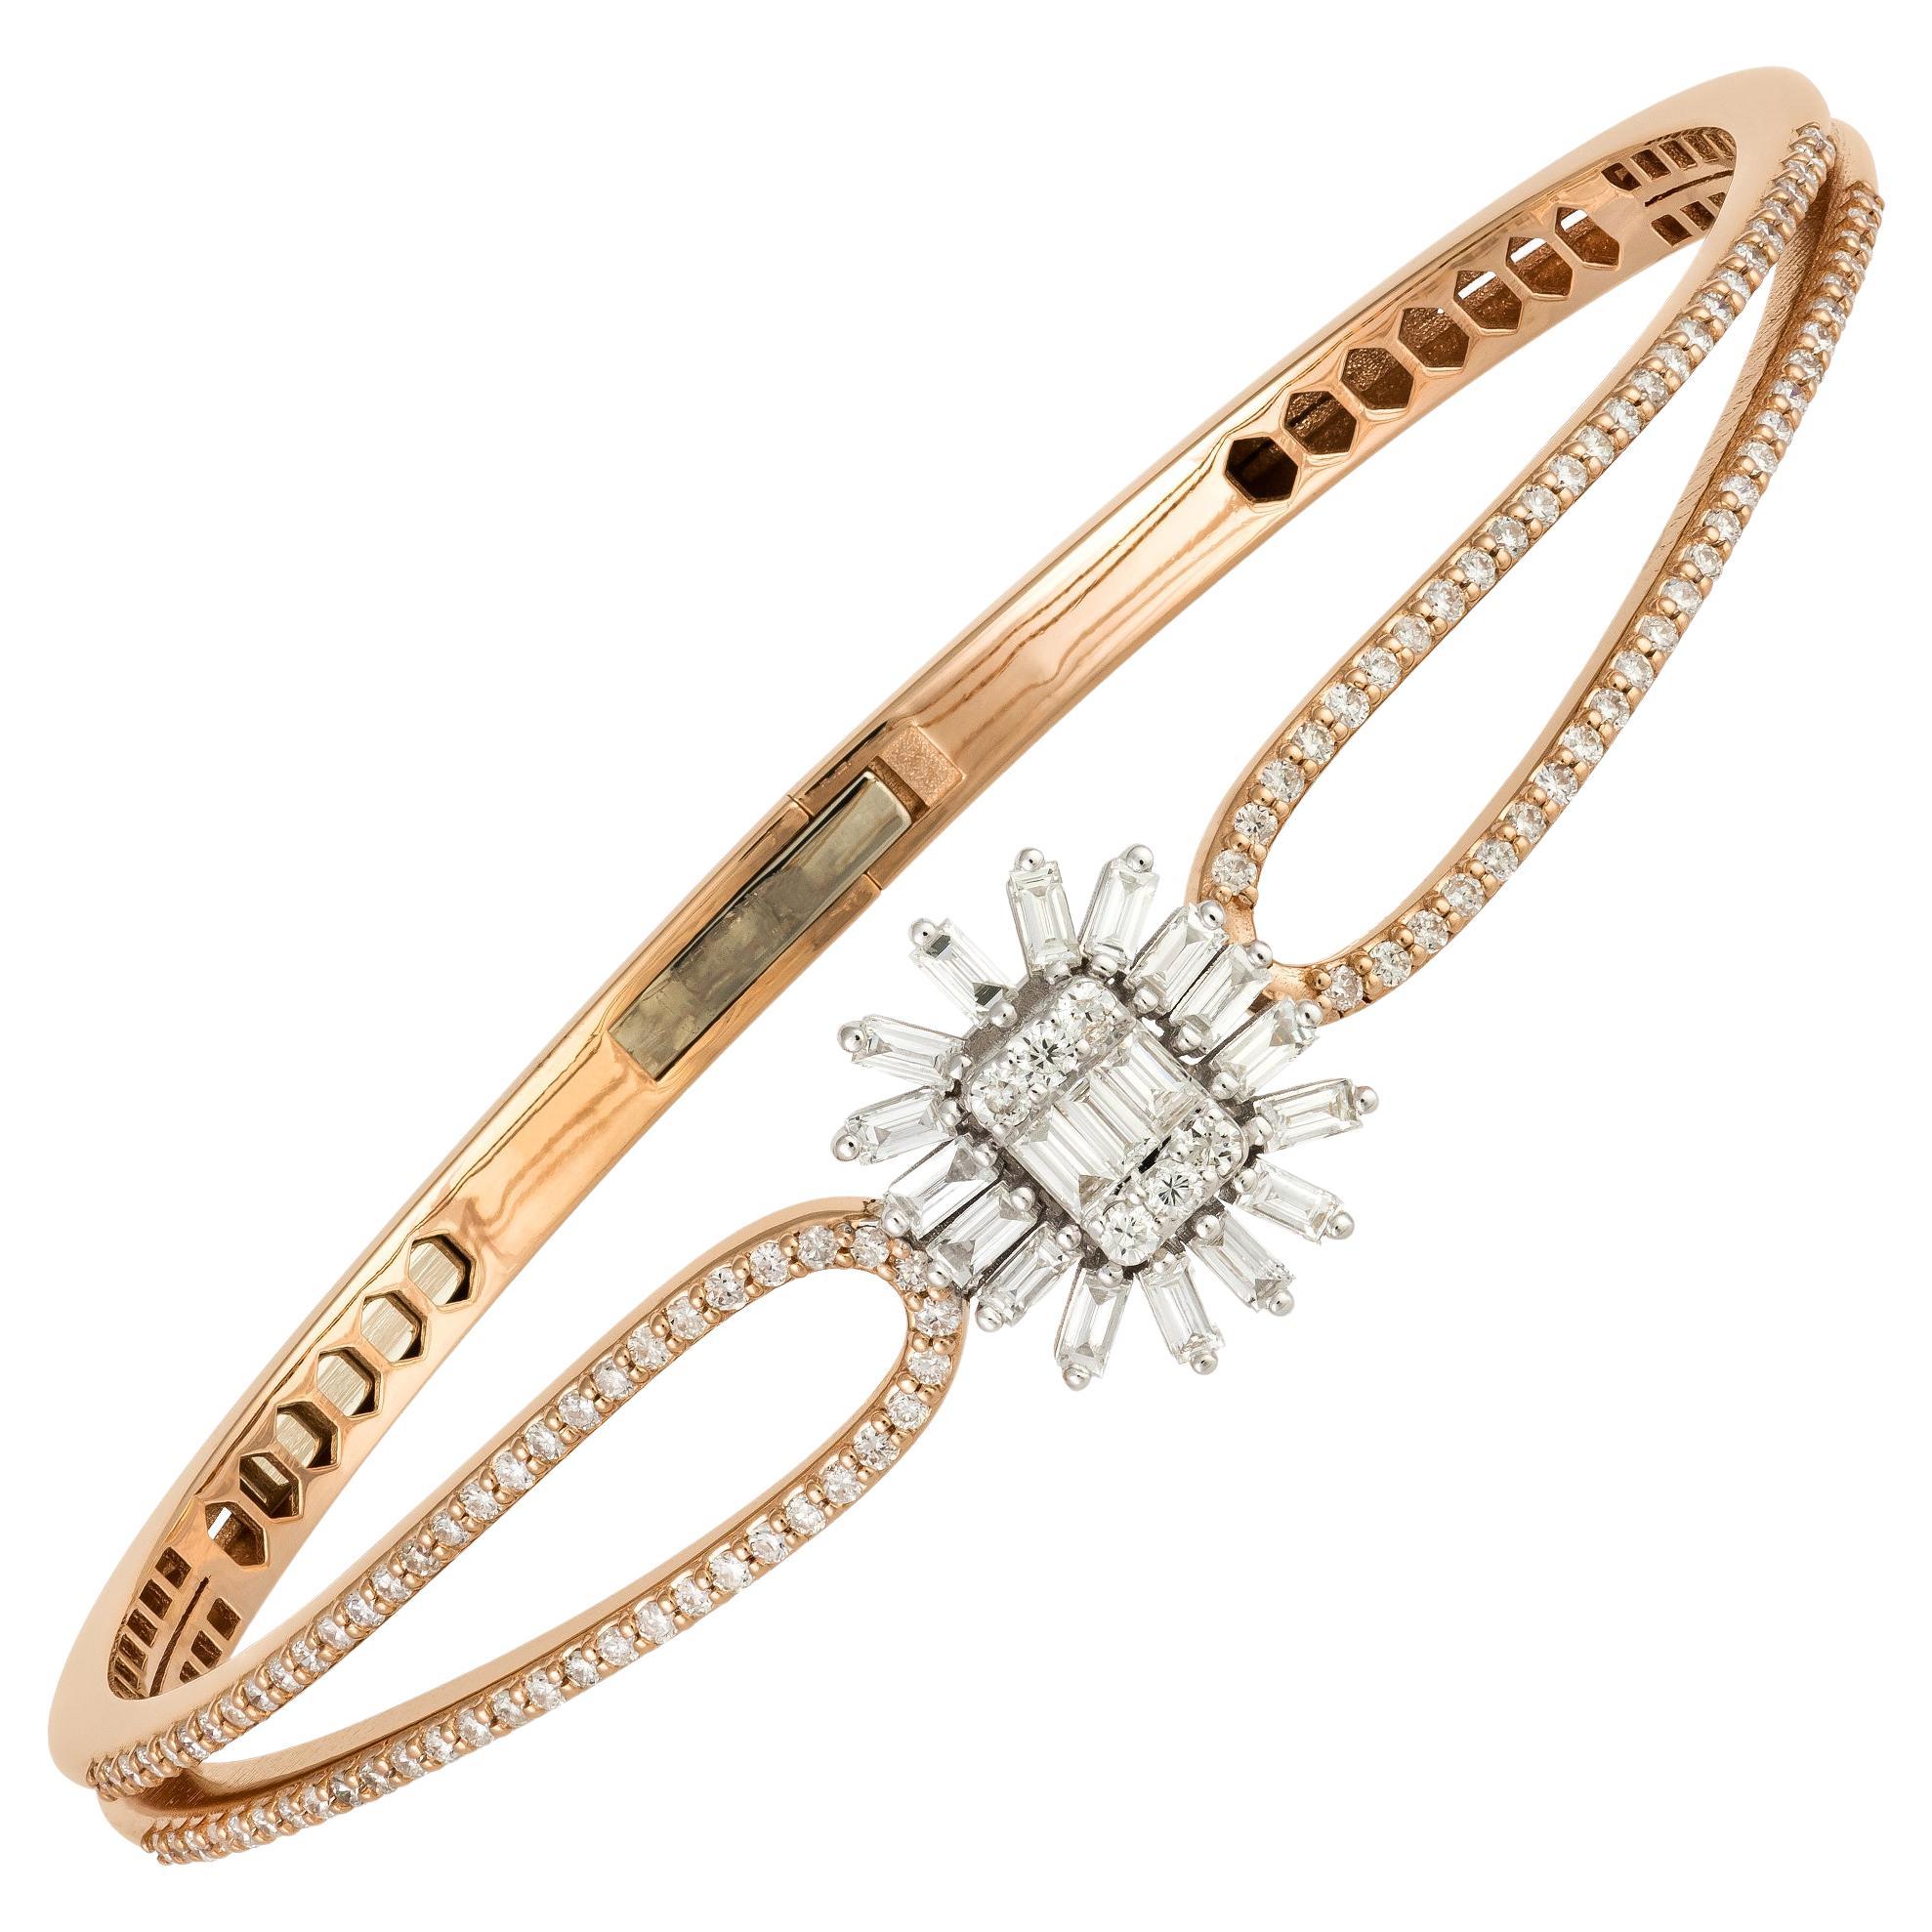 Exclusive White Pink Gold 18K Bracelet Diamond for Her